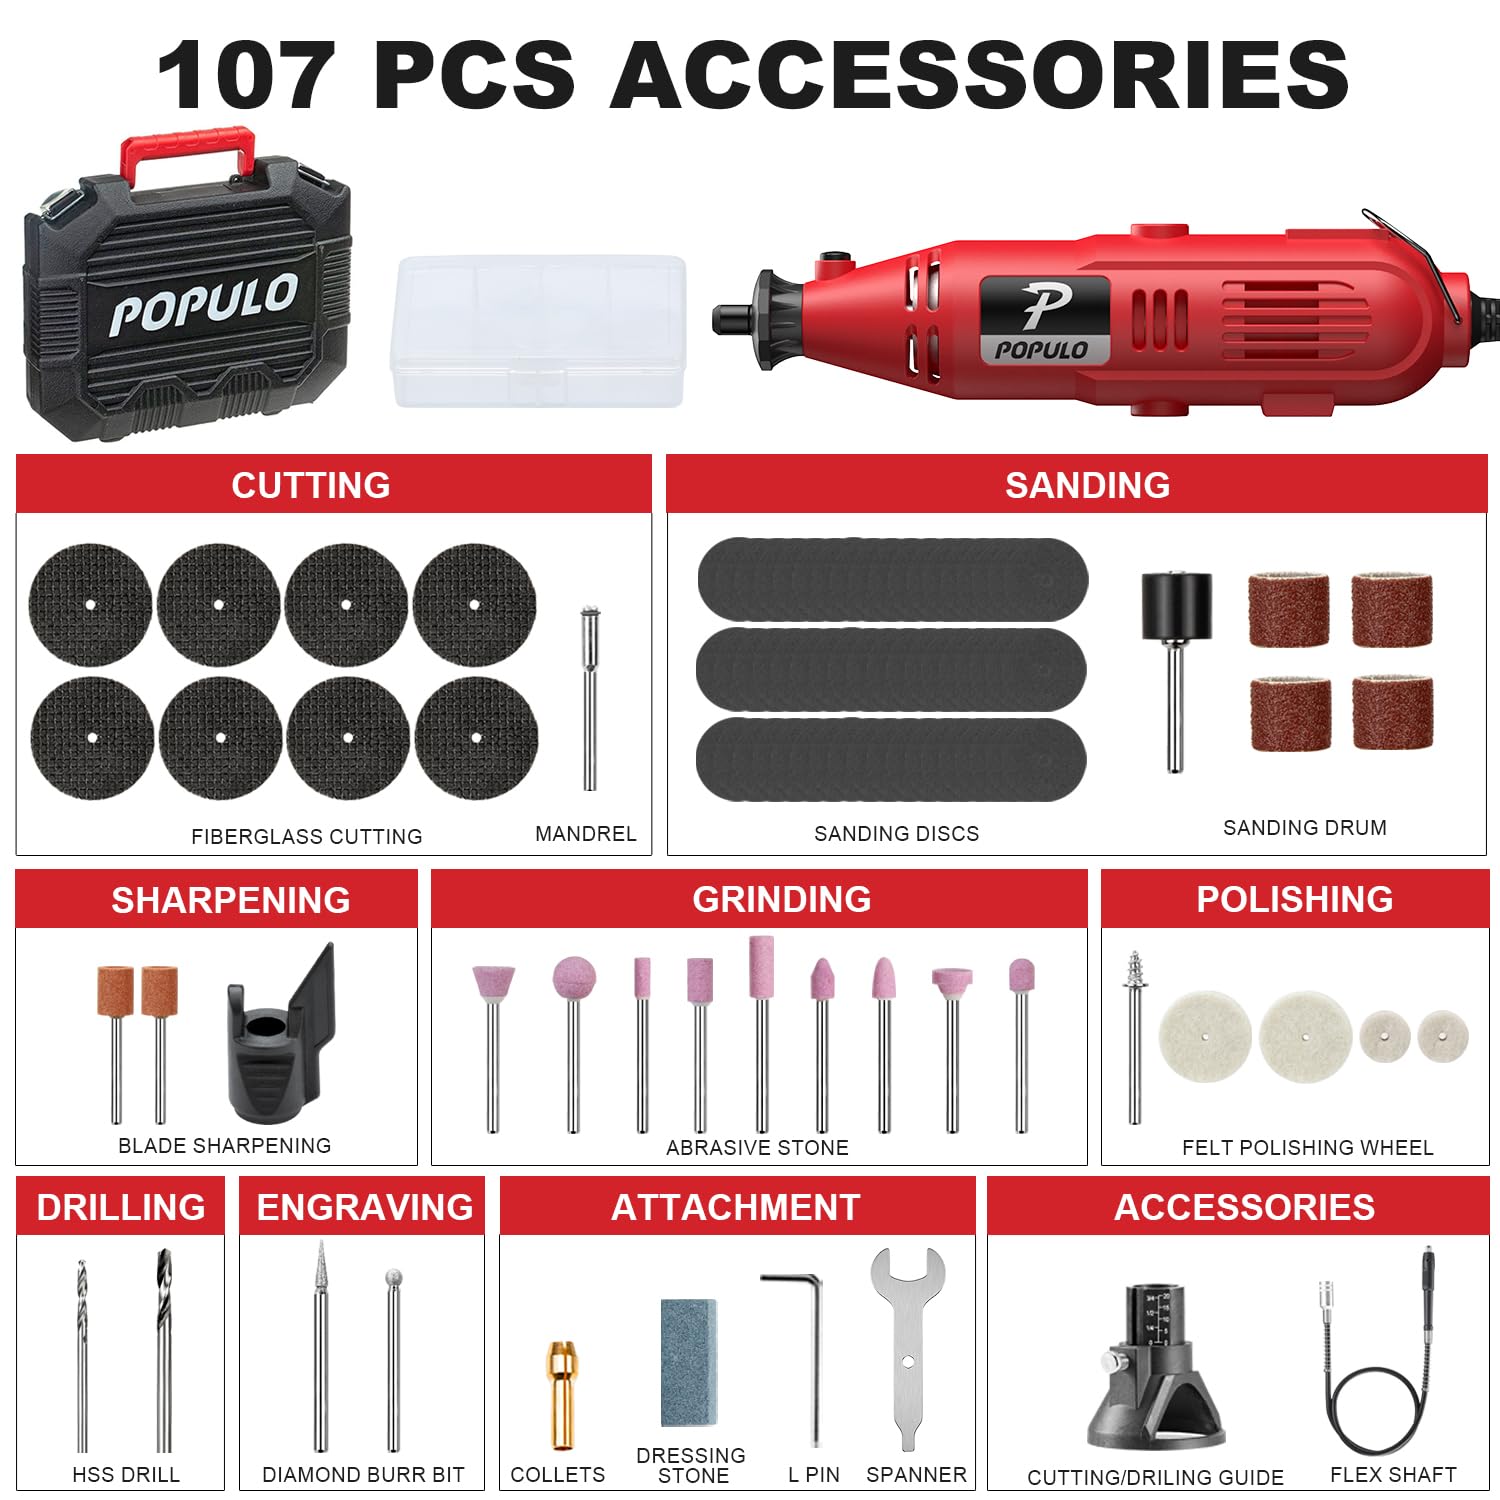 POPULO Power Rotary Tool Kit with Flexible Shaft, 107 PCS, Variable Speed Engraving Tool Kit Grinder Woodworking Corded Rotary Tools Drimmer Set, for Carving Sanding Cutting Polishing, Gift for DIYer